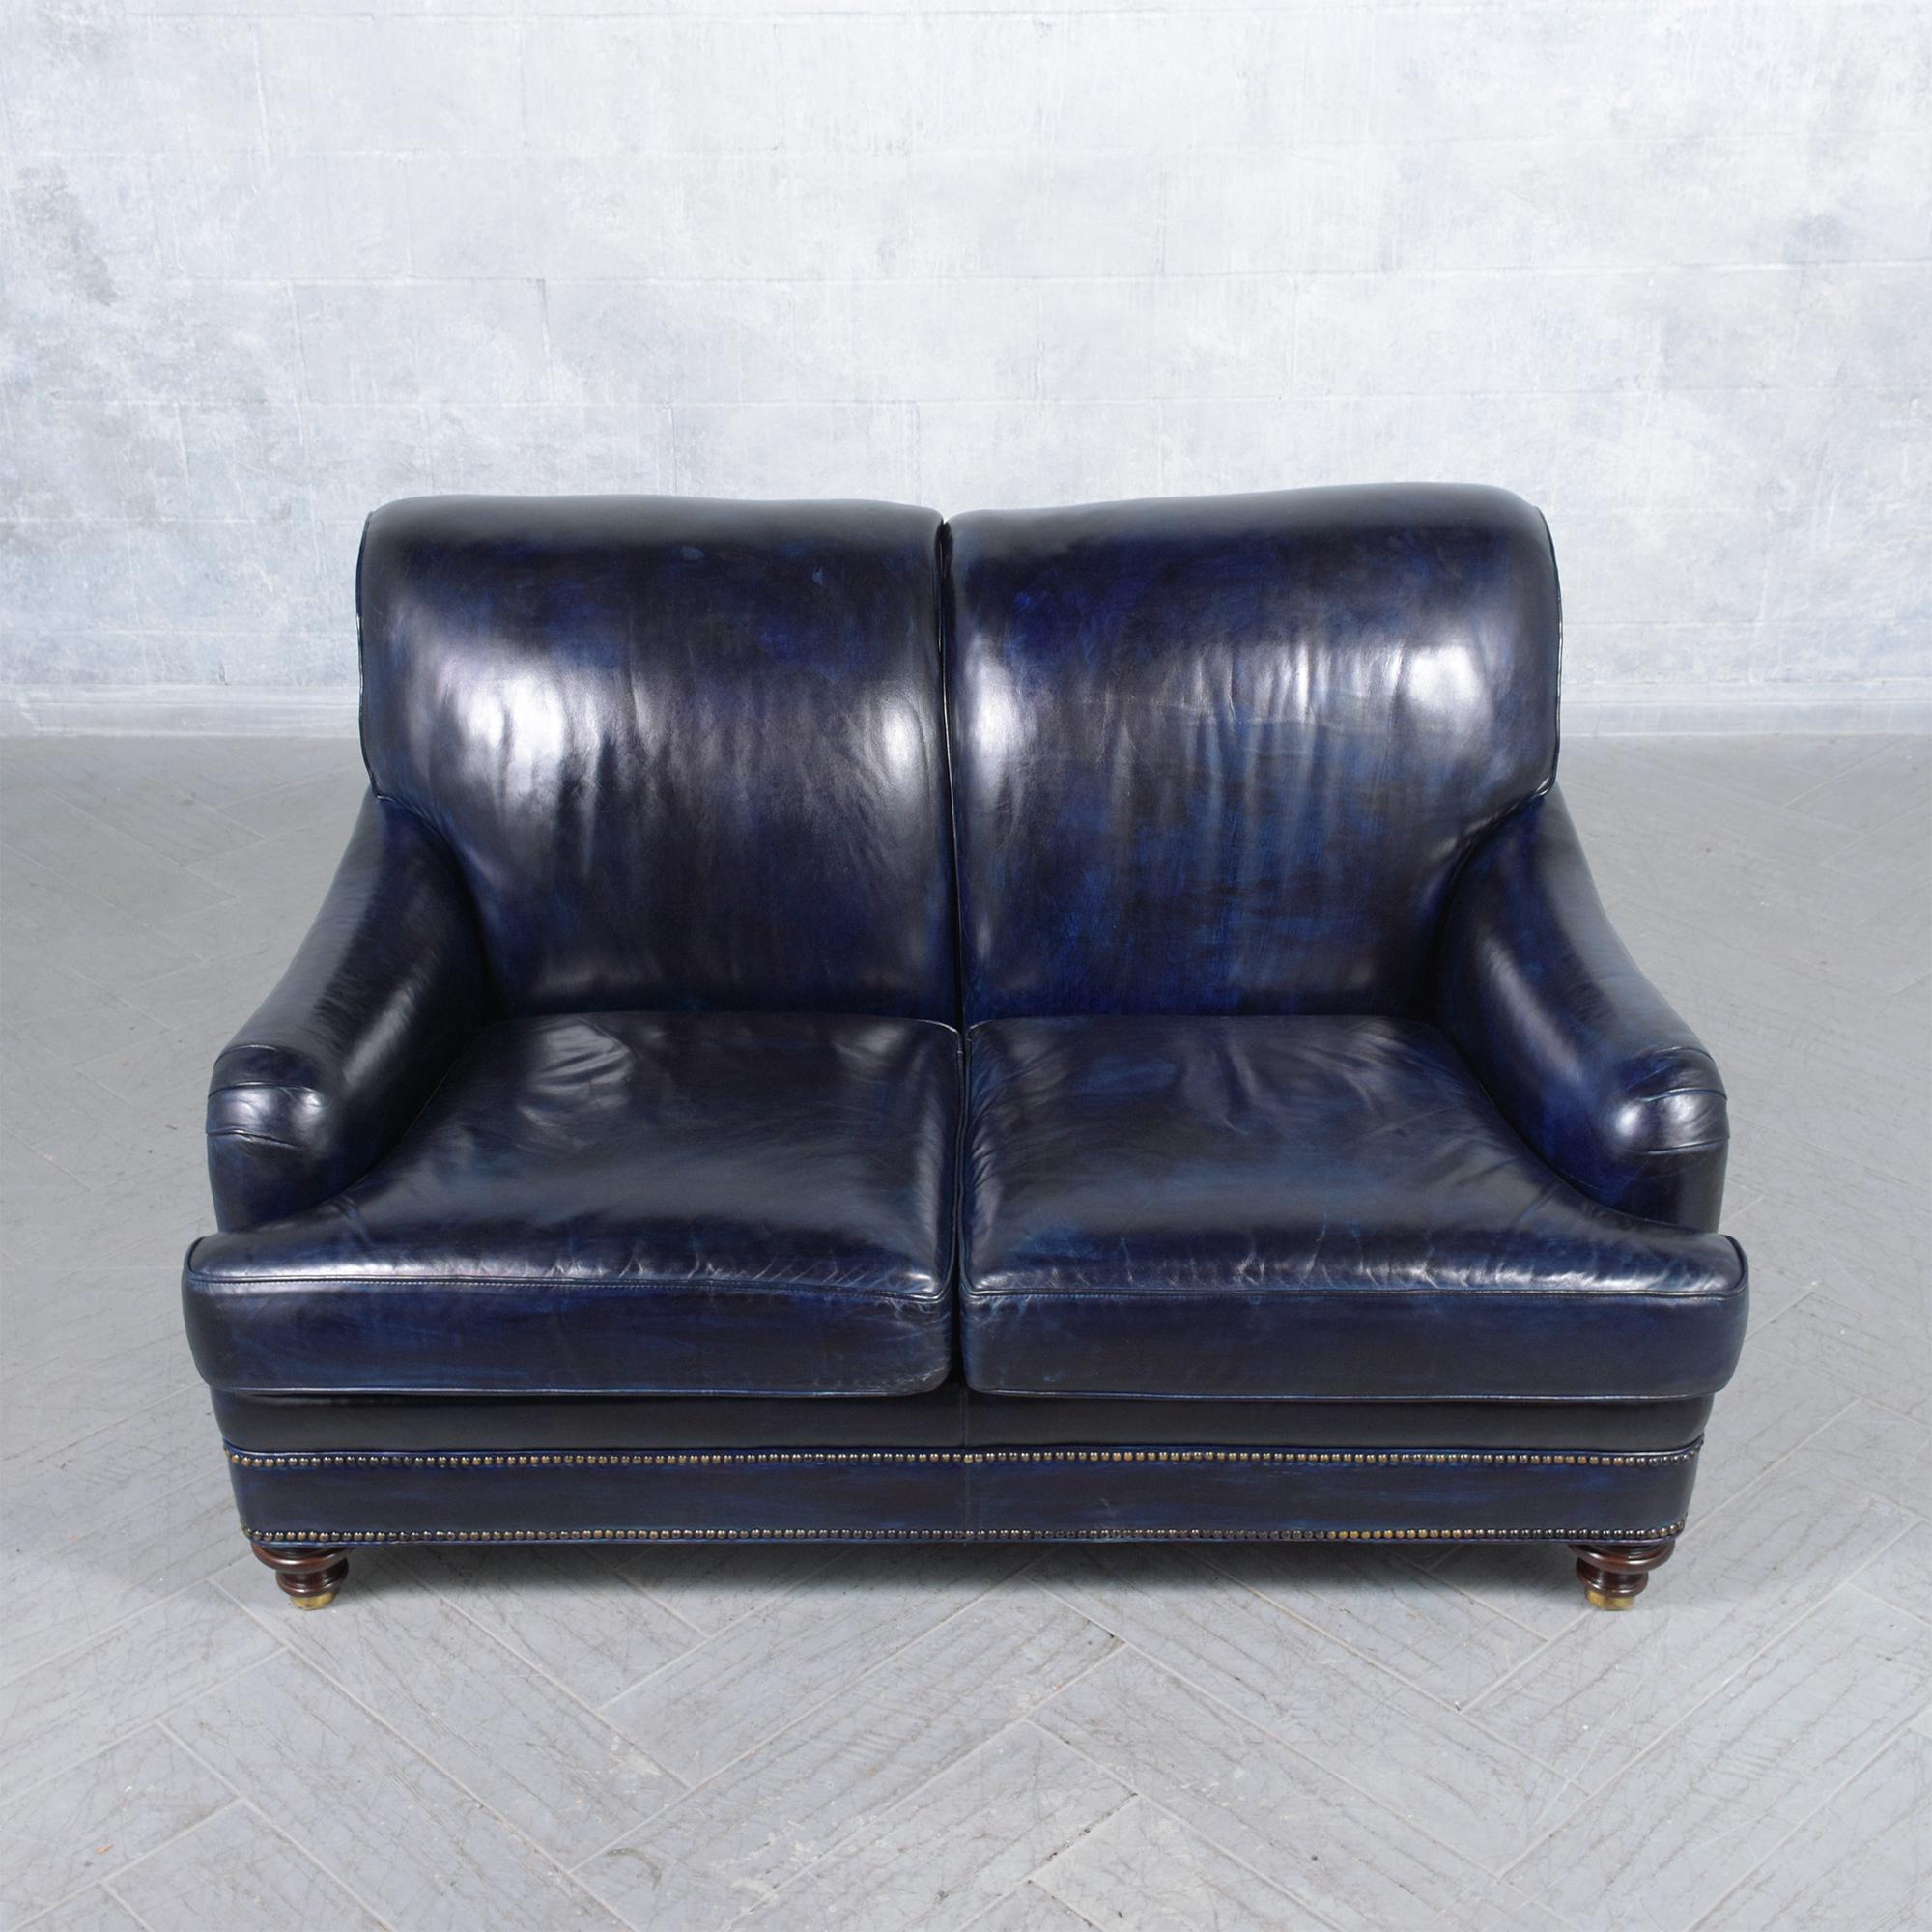 American Hancock & Moore Loveseat: Classic English Elegance in Navy Blue Leather